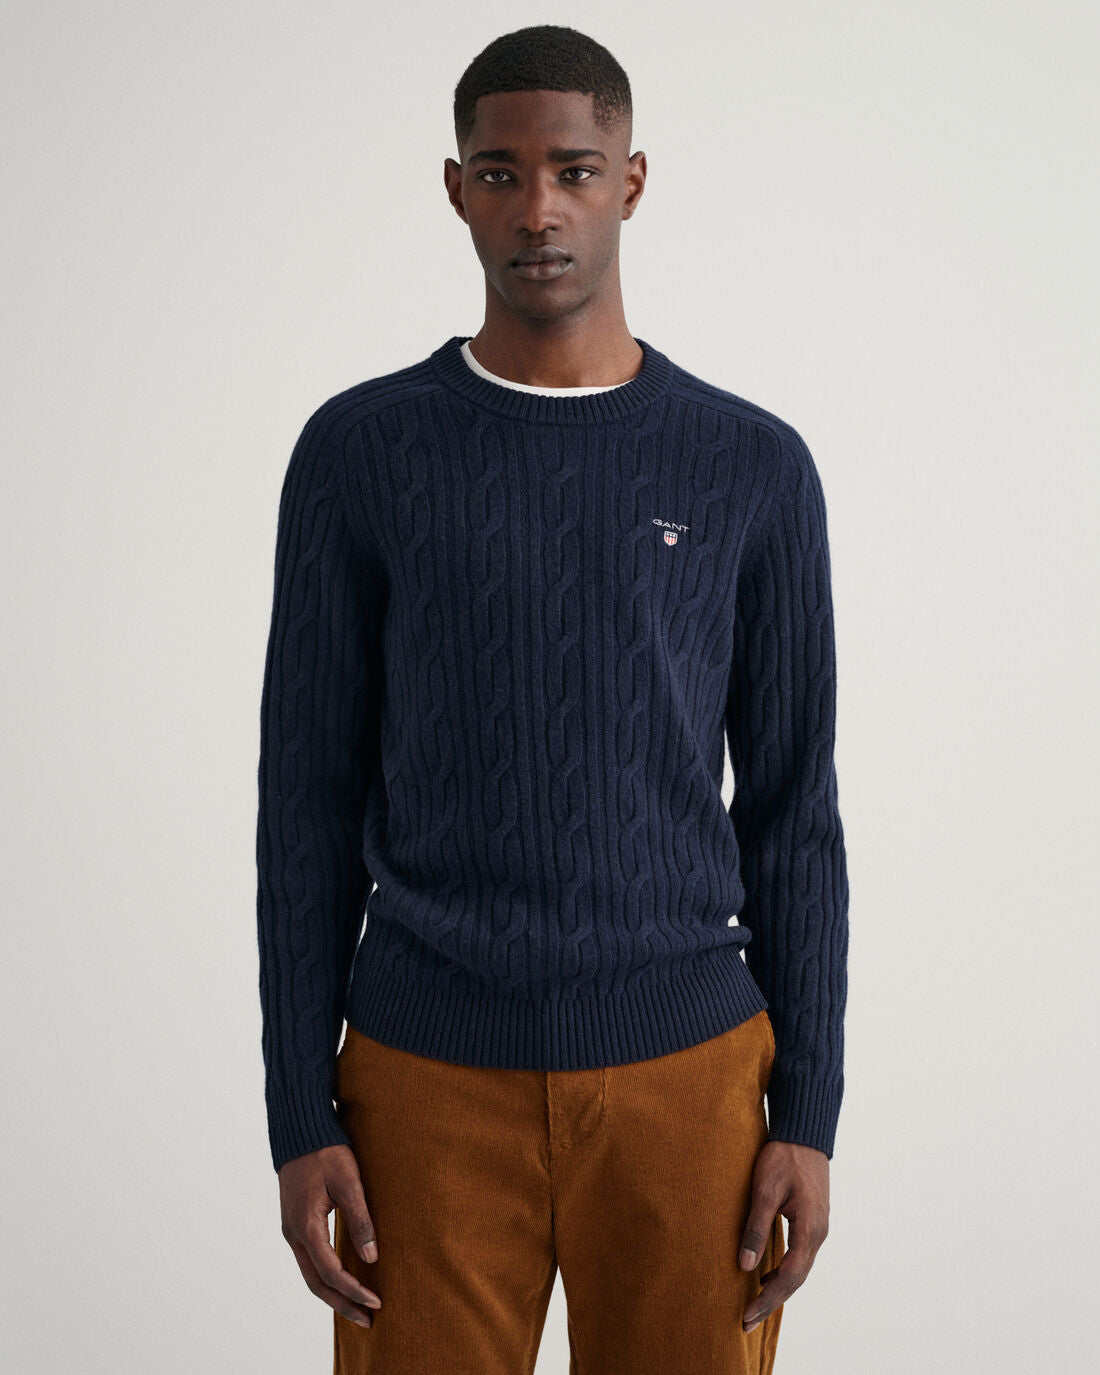 Offwhite woolen cable crew neck pullover Gant - 8050123/130